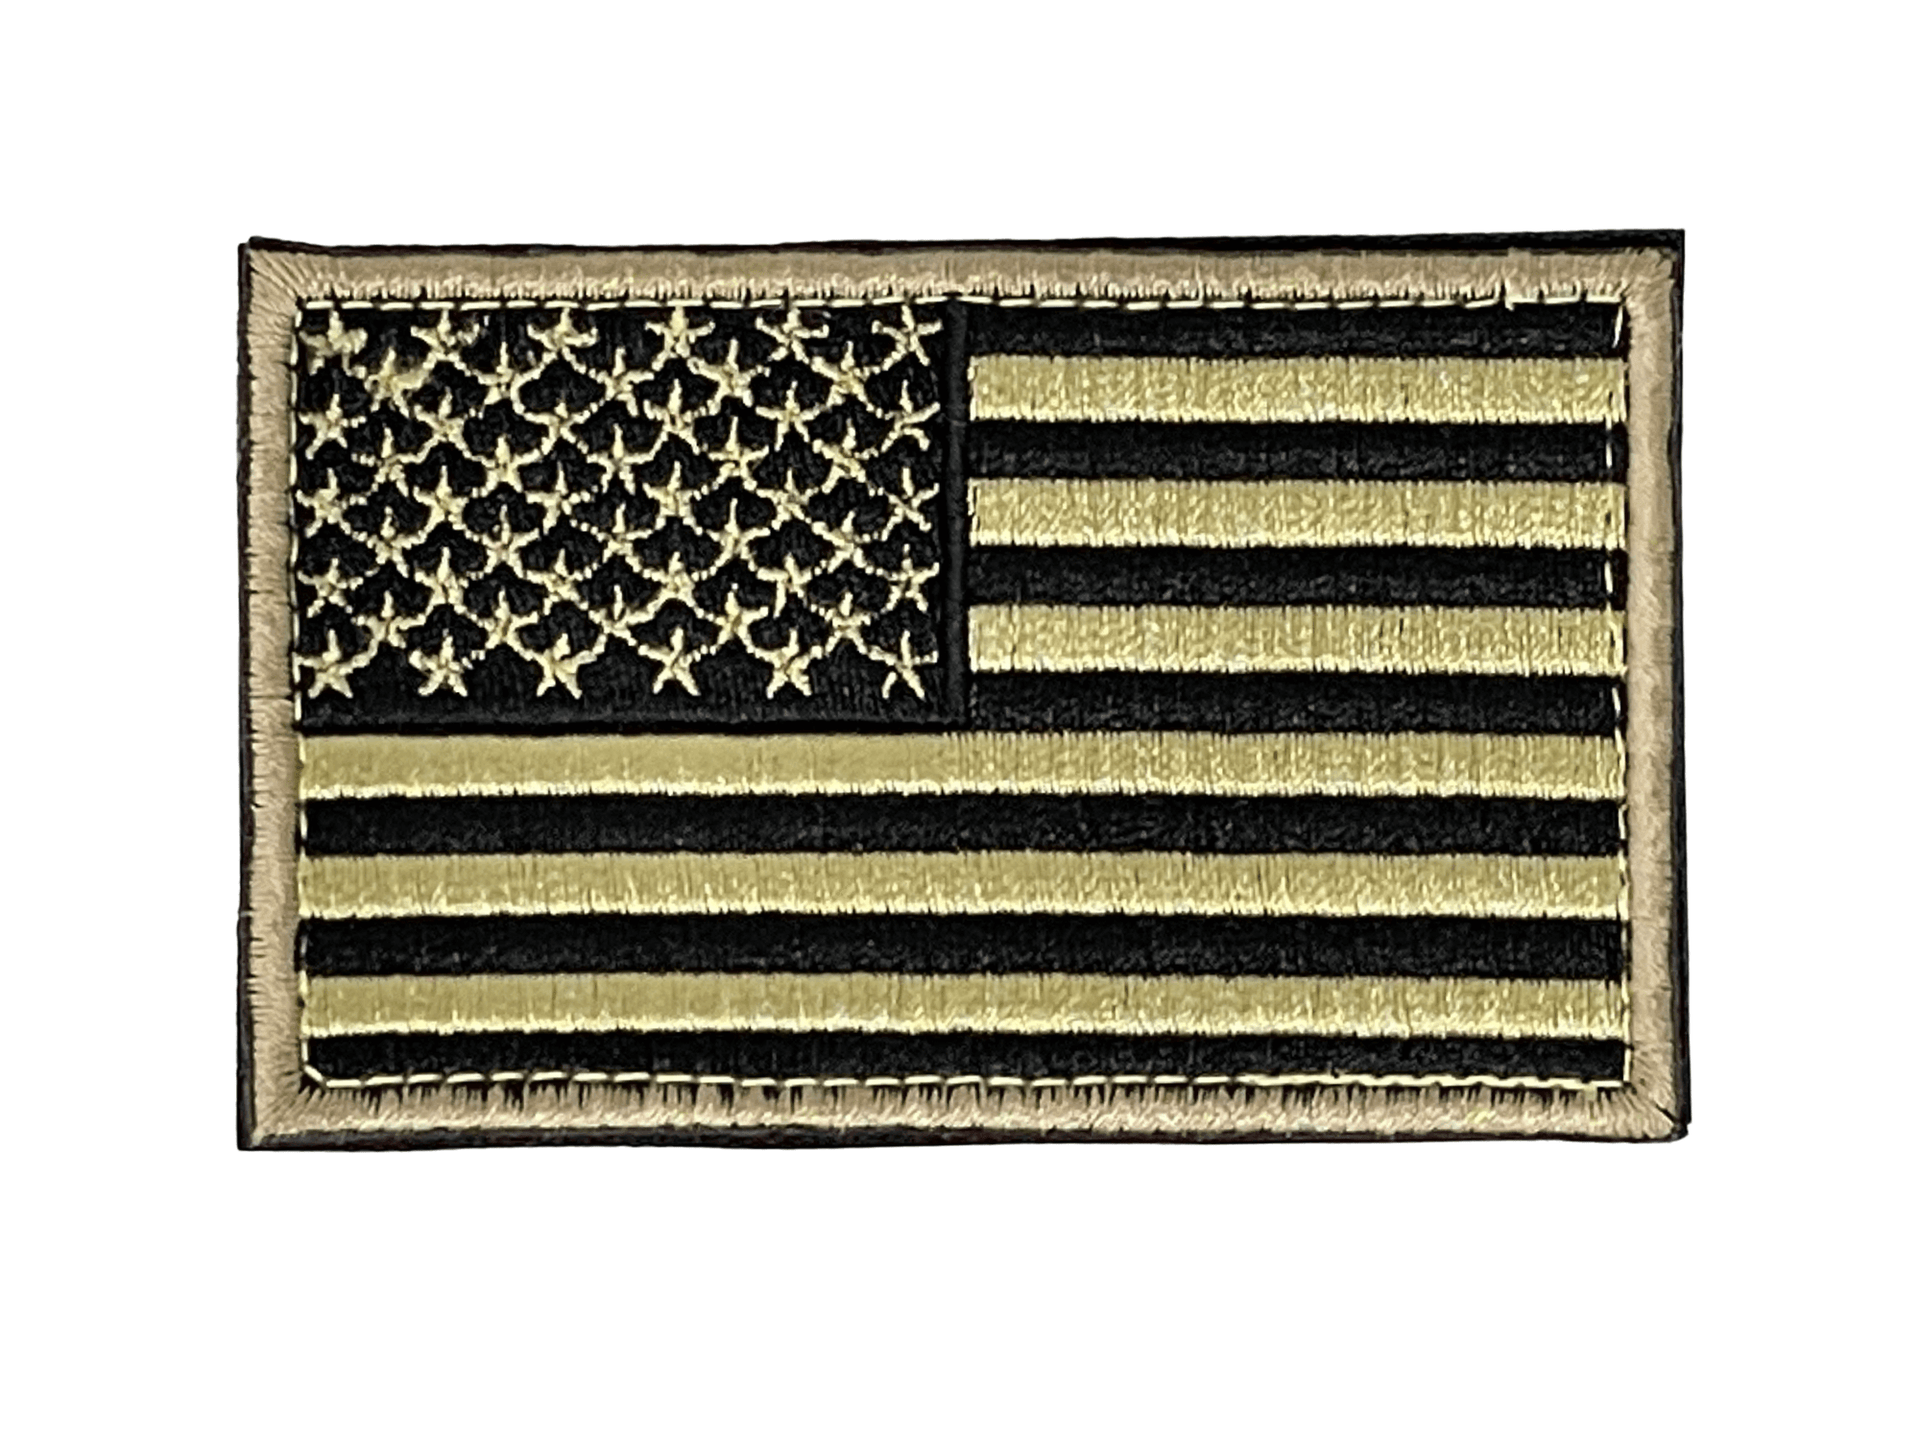 USA Flag Patch with Velcro Backing - Mercantile Mountain